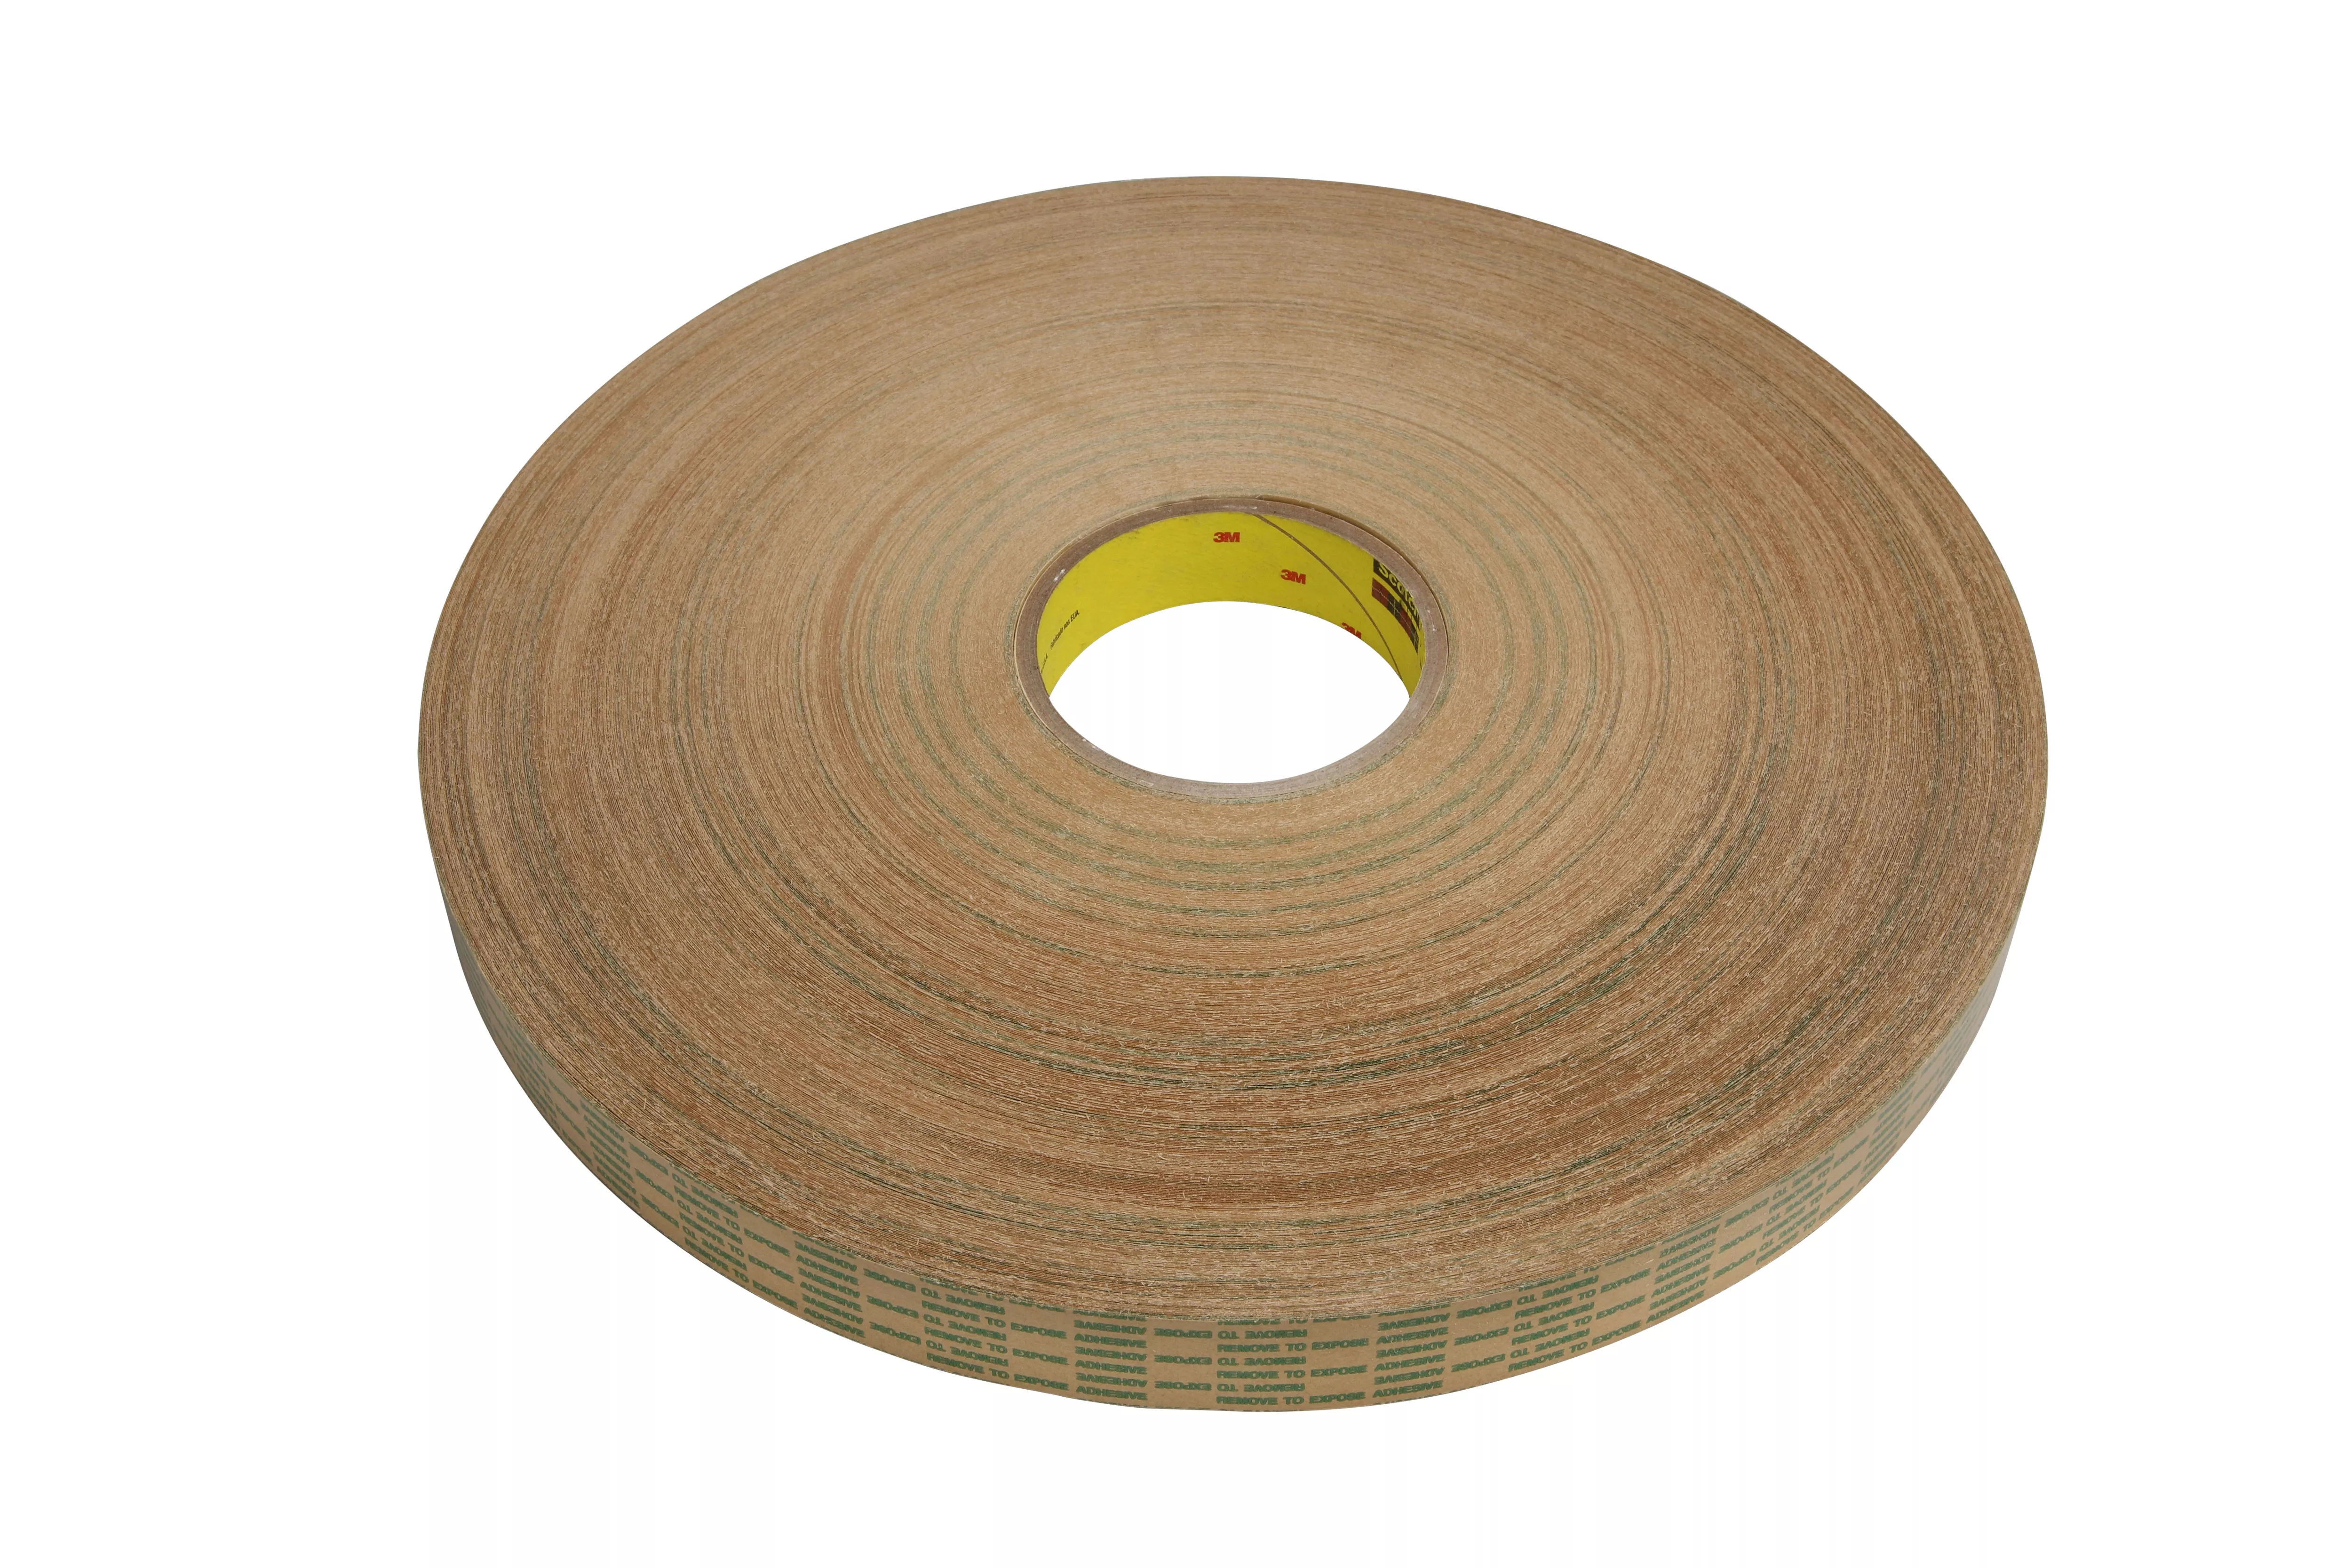 3M™ Adhesive Transfer Tape Extended Liner 450XL Translucent, 1 in x 750
yd, 1 mil, 9 Roll/Case